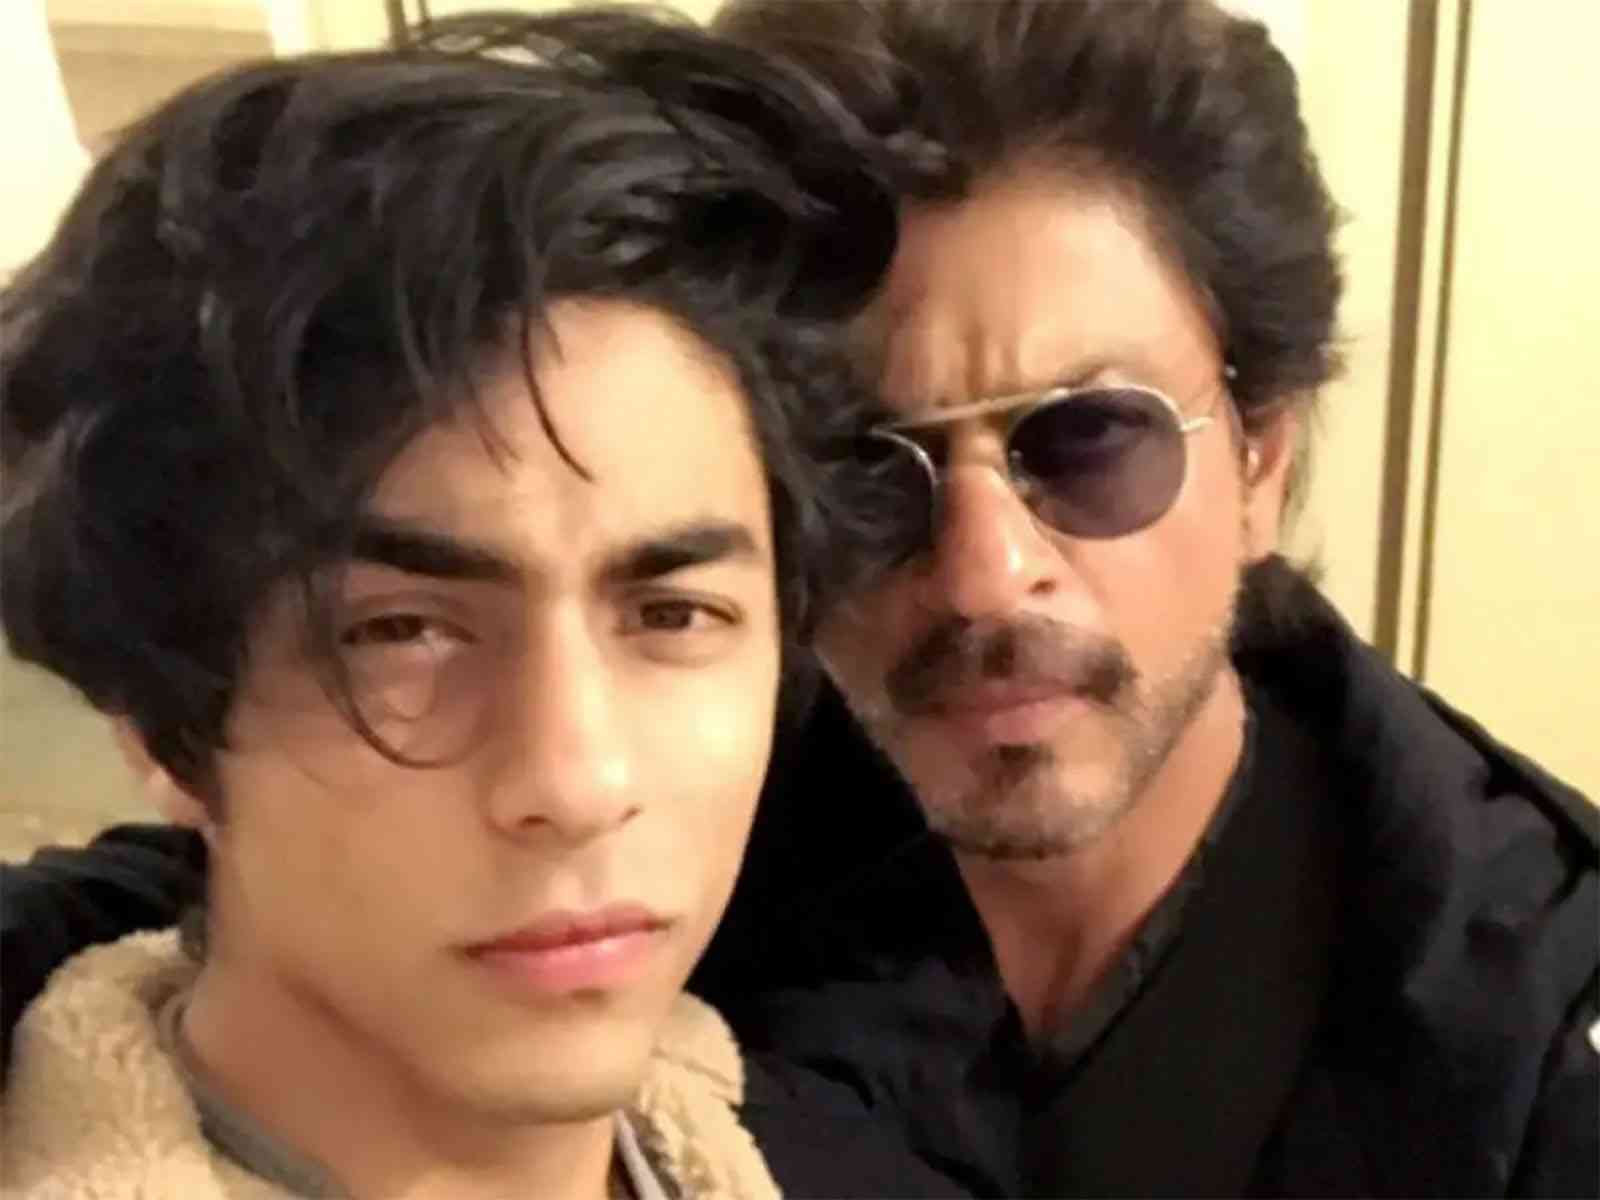 Shah Rukh Khan's son is released from prison amid a huge crowd (video) Aryan Khan, son of Bollywood star Shah Rukh Khan, was released from prison on Saturday after spending 28 days behind bars over his involvement in a drug case.